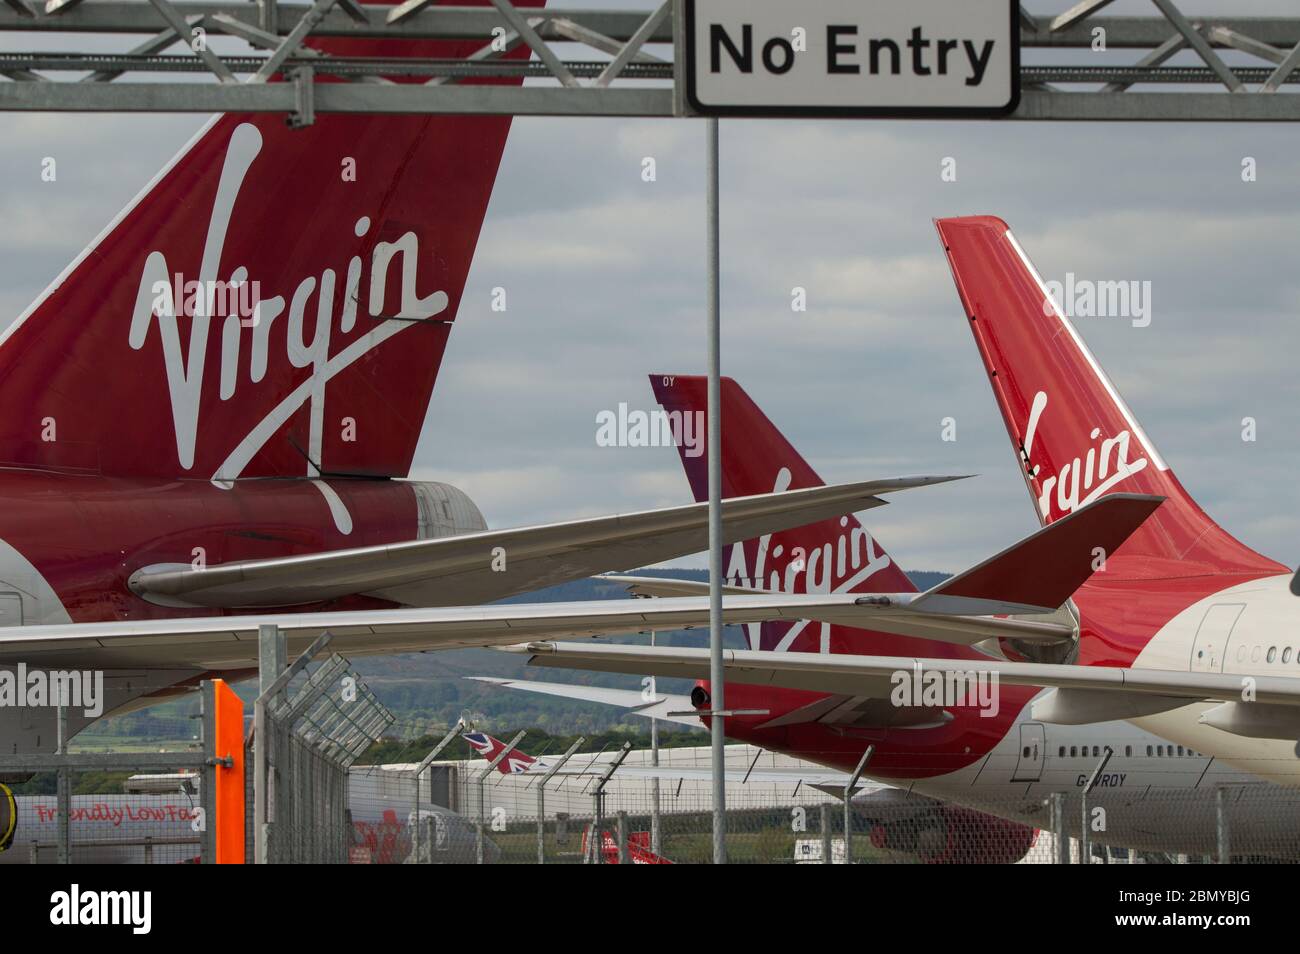 Glasgow, UK. 11 May, 2020.  Pictured: Virgin Atlantic move more of their aircraft to Glasgow Airport for storage during the Coronavirus (COVID19) extended lockdown. Seen on the Tarmac are two Boeing 747-400 and two Airbus A330-300 Aircraft.   So far Virgin Atlantic announced they will close down their operations at Gatwick Airport indefinitely, which will have massive knock on effect for other airlines and the south of England. Stock Photo